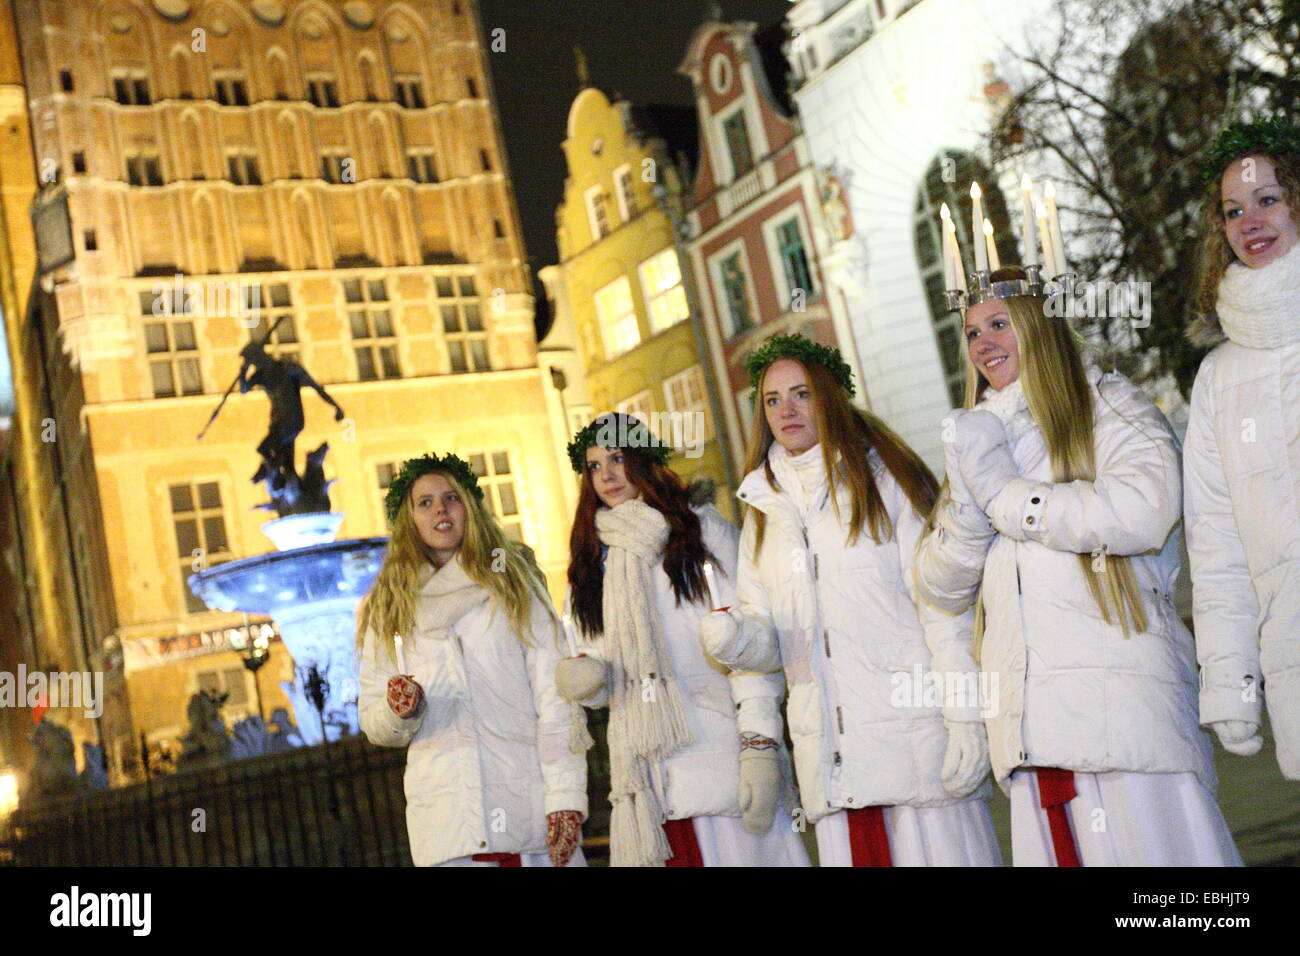 Gdansk, Poland 1st, Dec. 2014 Young girls from Kalmar, Sweden dressed in a white dress and a red sash (as the symbol of martyrdom) carries candles in proccesion along the Gdansk Old City centre. One of them (Stina Mattisson) wears a crown of candles on her head. Girls dressed as Lucy carry cookies in procession and sing a songs. It is said that to vividly celebrate St. Lucy's Day will help one live the long winter days with enough light. Credit:  Michal Fludra/Alamy Live News Stock Photo